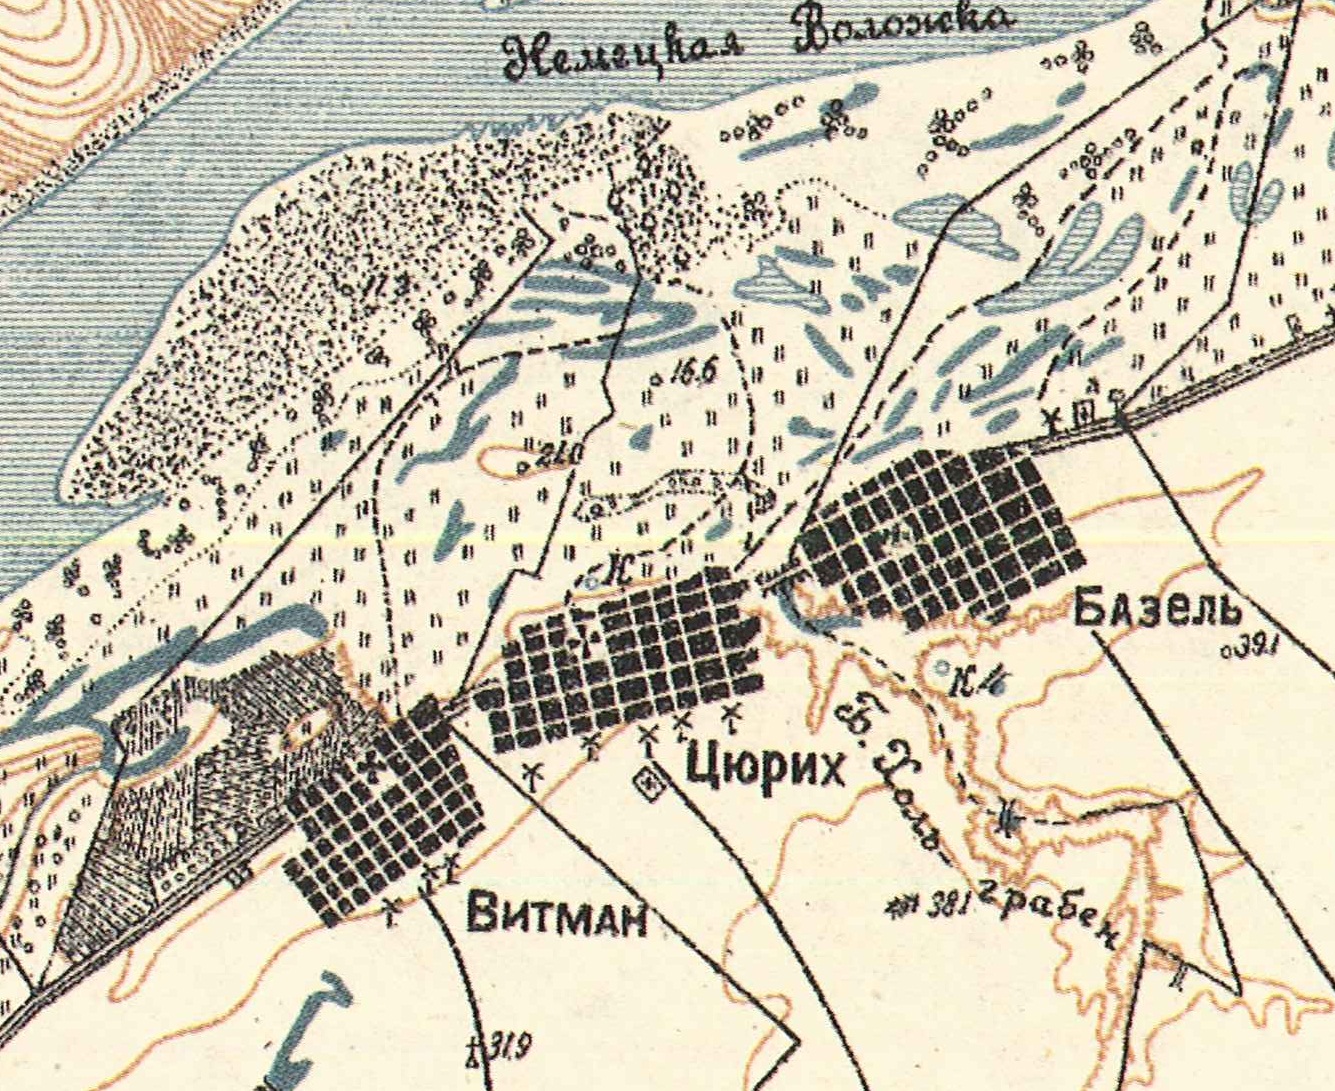 Map showing Basel (1935) on the right.